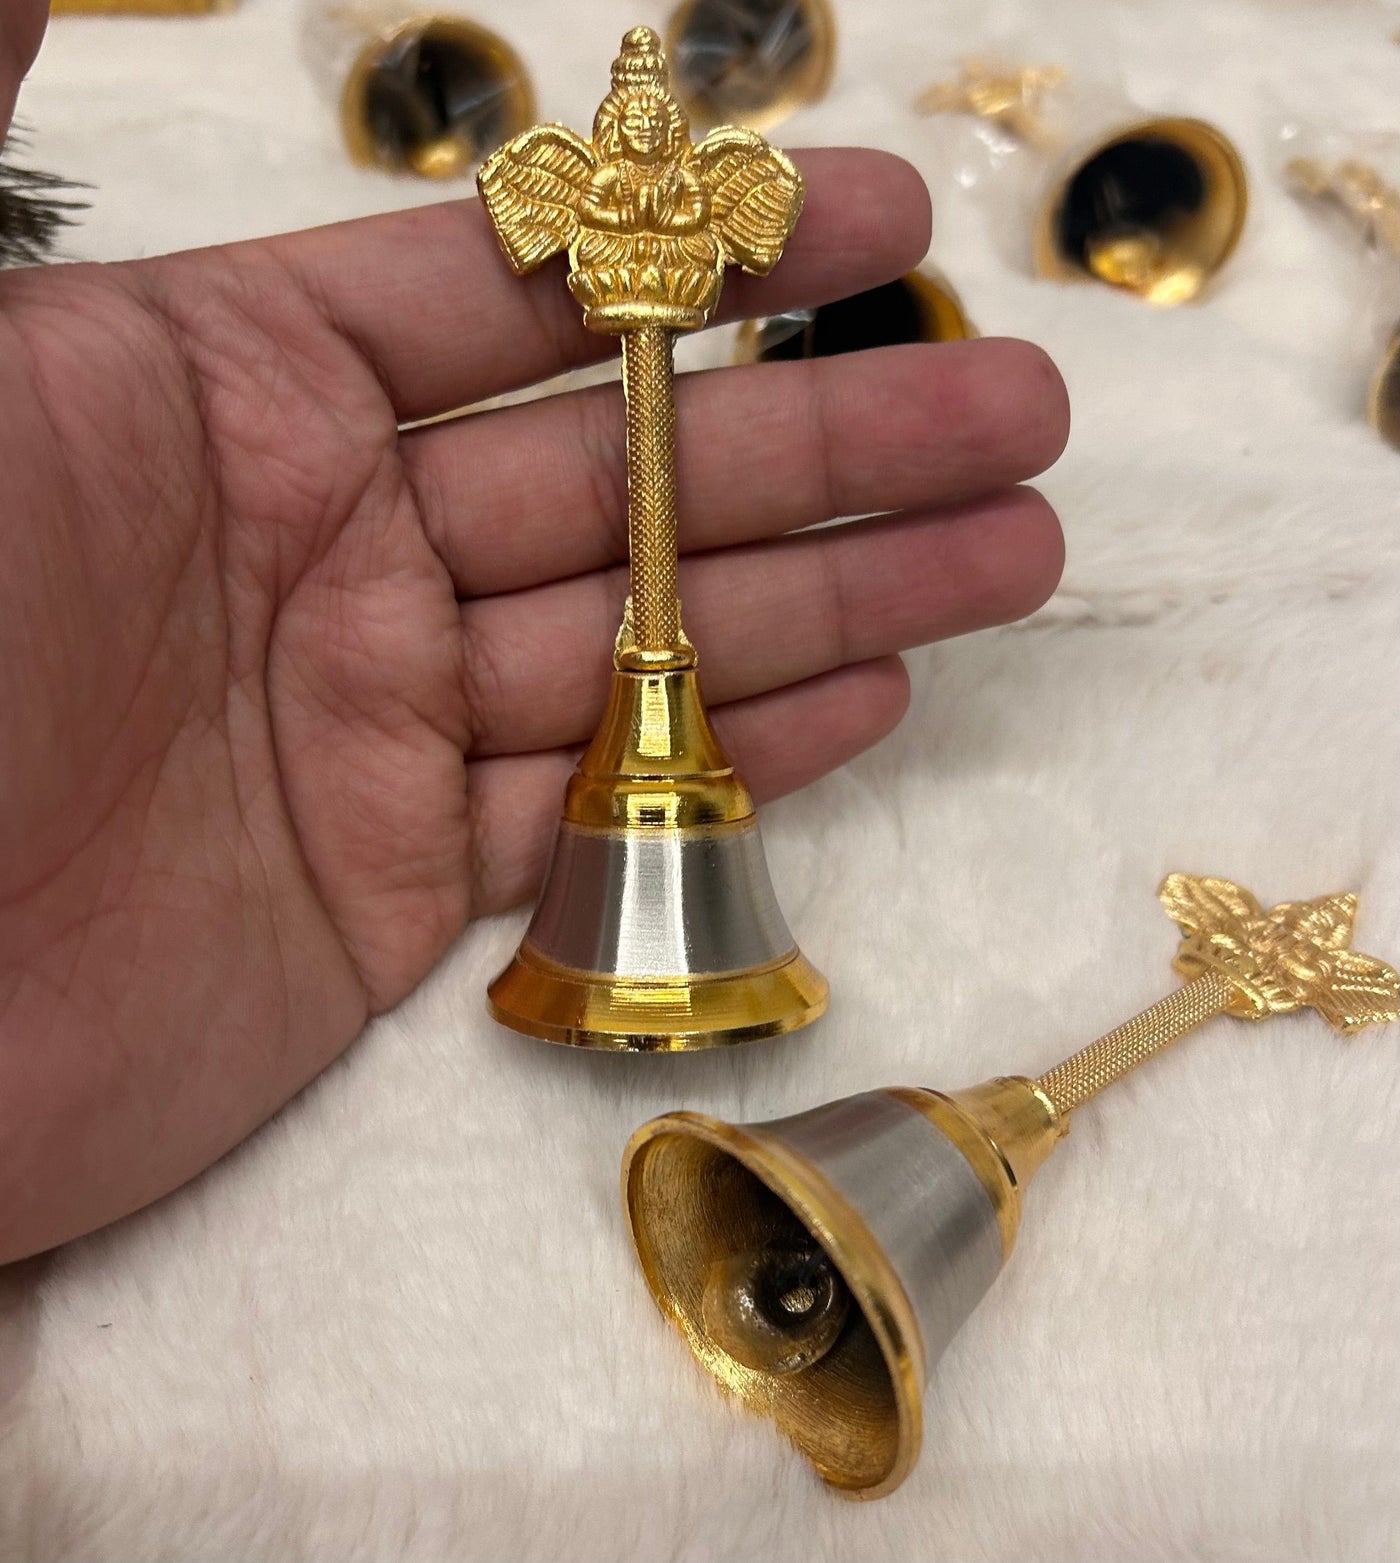 45 Rs per pc on buying 100 pcs | whstp at 8619550223 bells for couple welcome LAMANSH Golden plated Pooja Garuda Bells 🔔Ghanti for Puja Mandir or mangal path ceremony giveaways | Bells for welcome in weddings / Return gifts 🎁 for puja ceremony